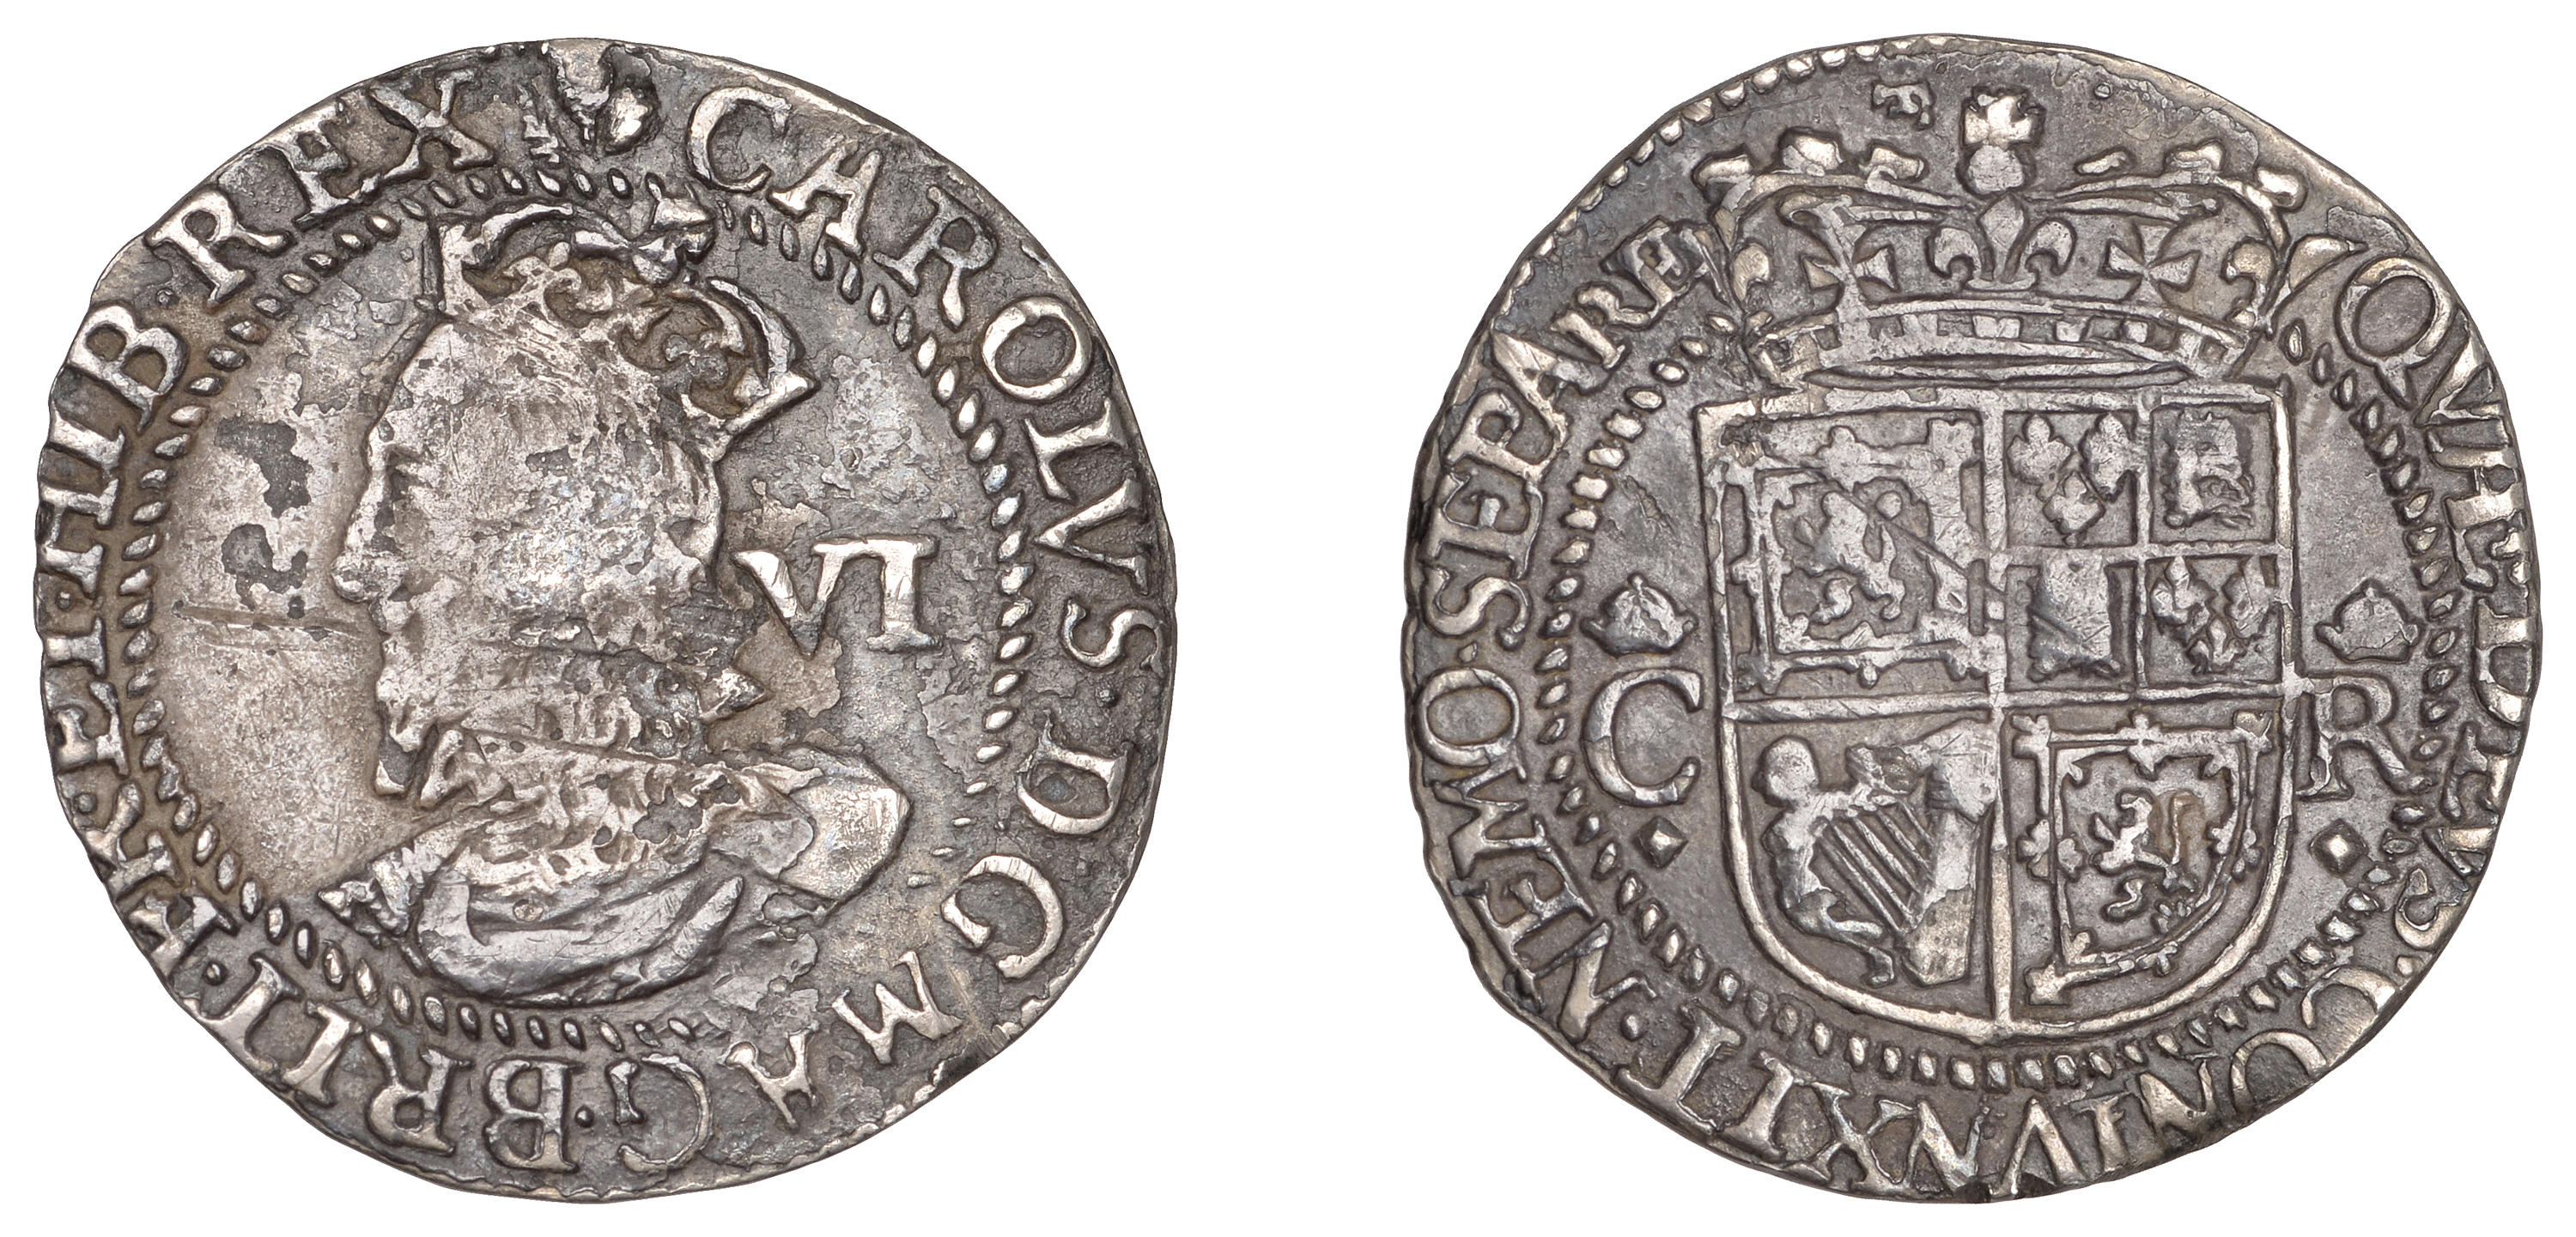 Charles I (1625-1649), Third coinage, Falconer's Second issue, Six Shillings, mm. thistle on...